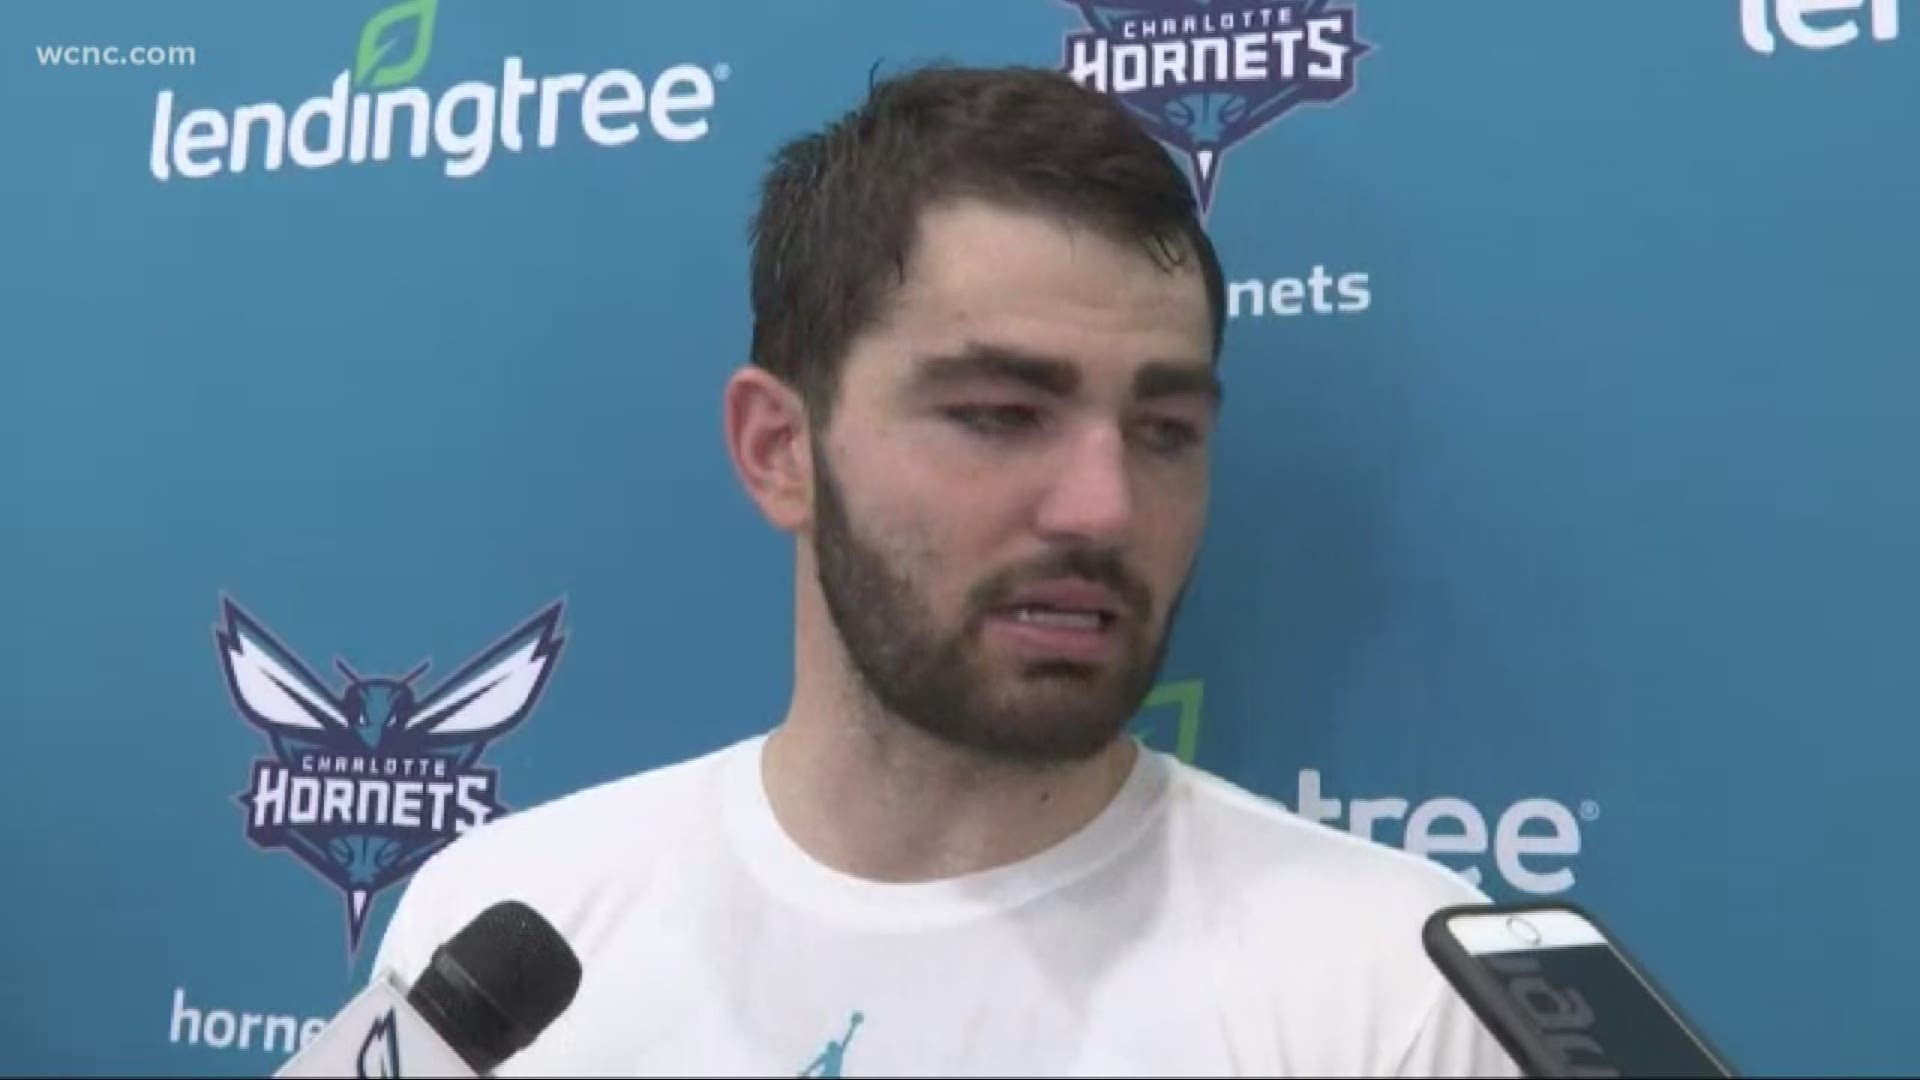 Former Tar Heel Luke Maye worked out for his hometown Charlotte Hornets on Saturday.